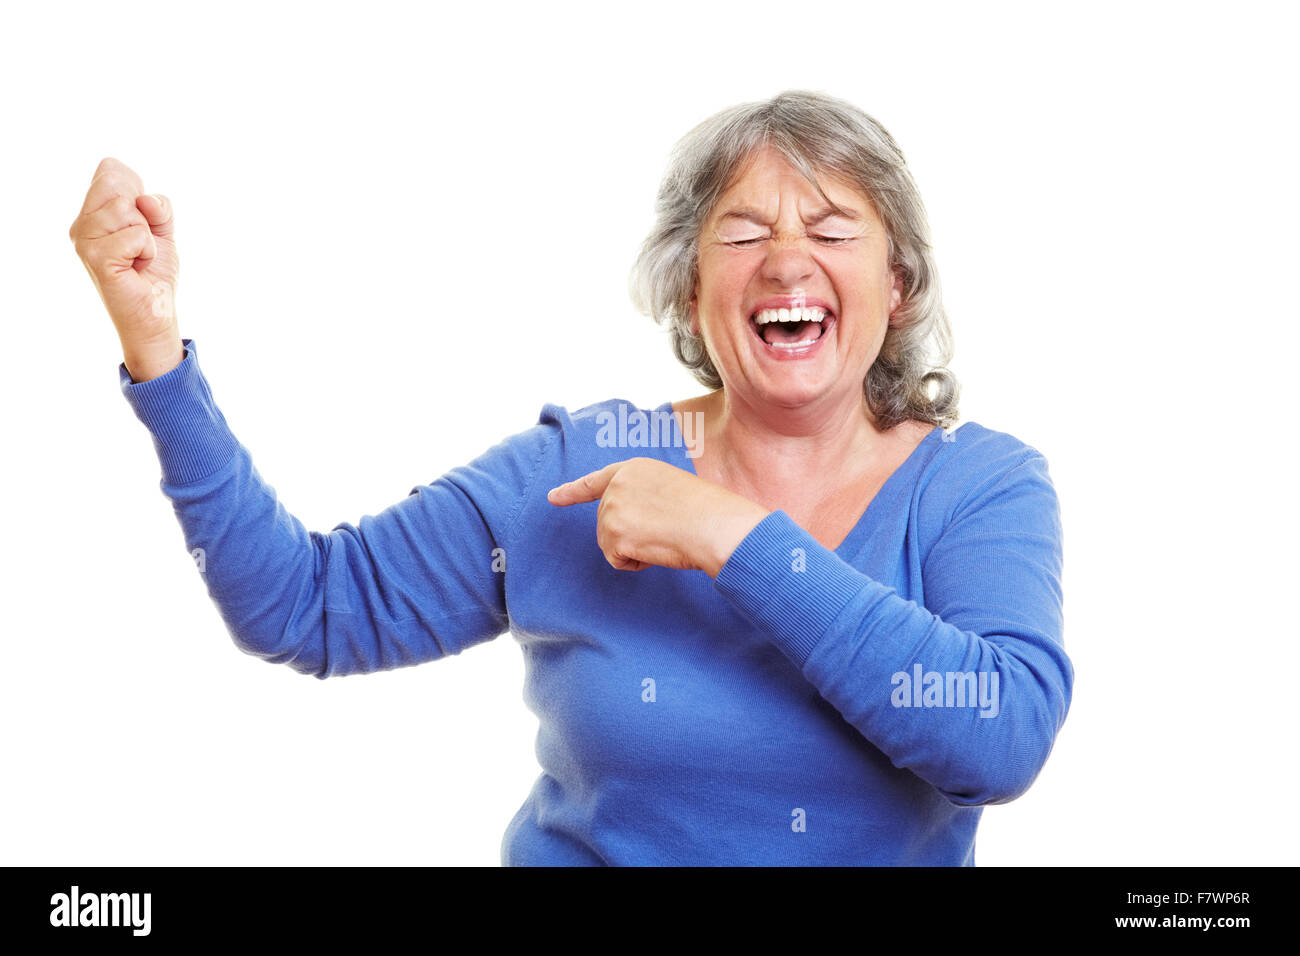 Happy female senior citizen showing her muscles Stock Photo